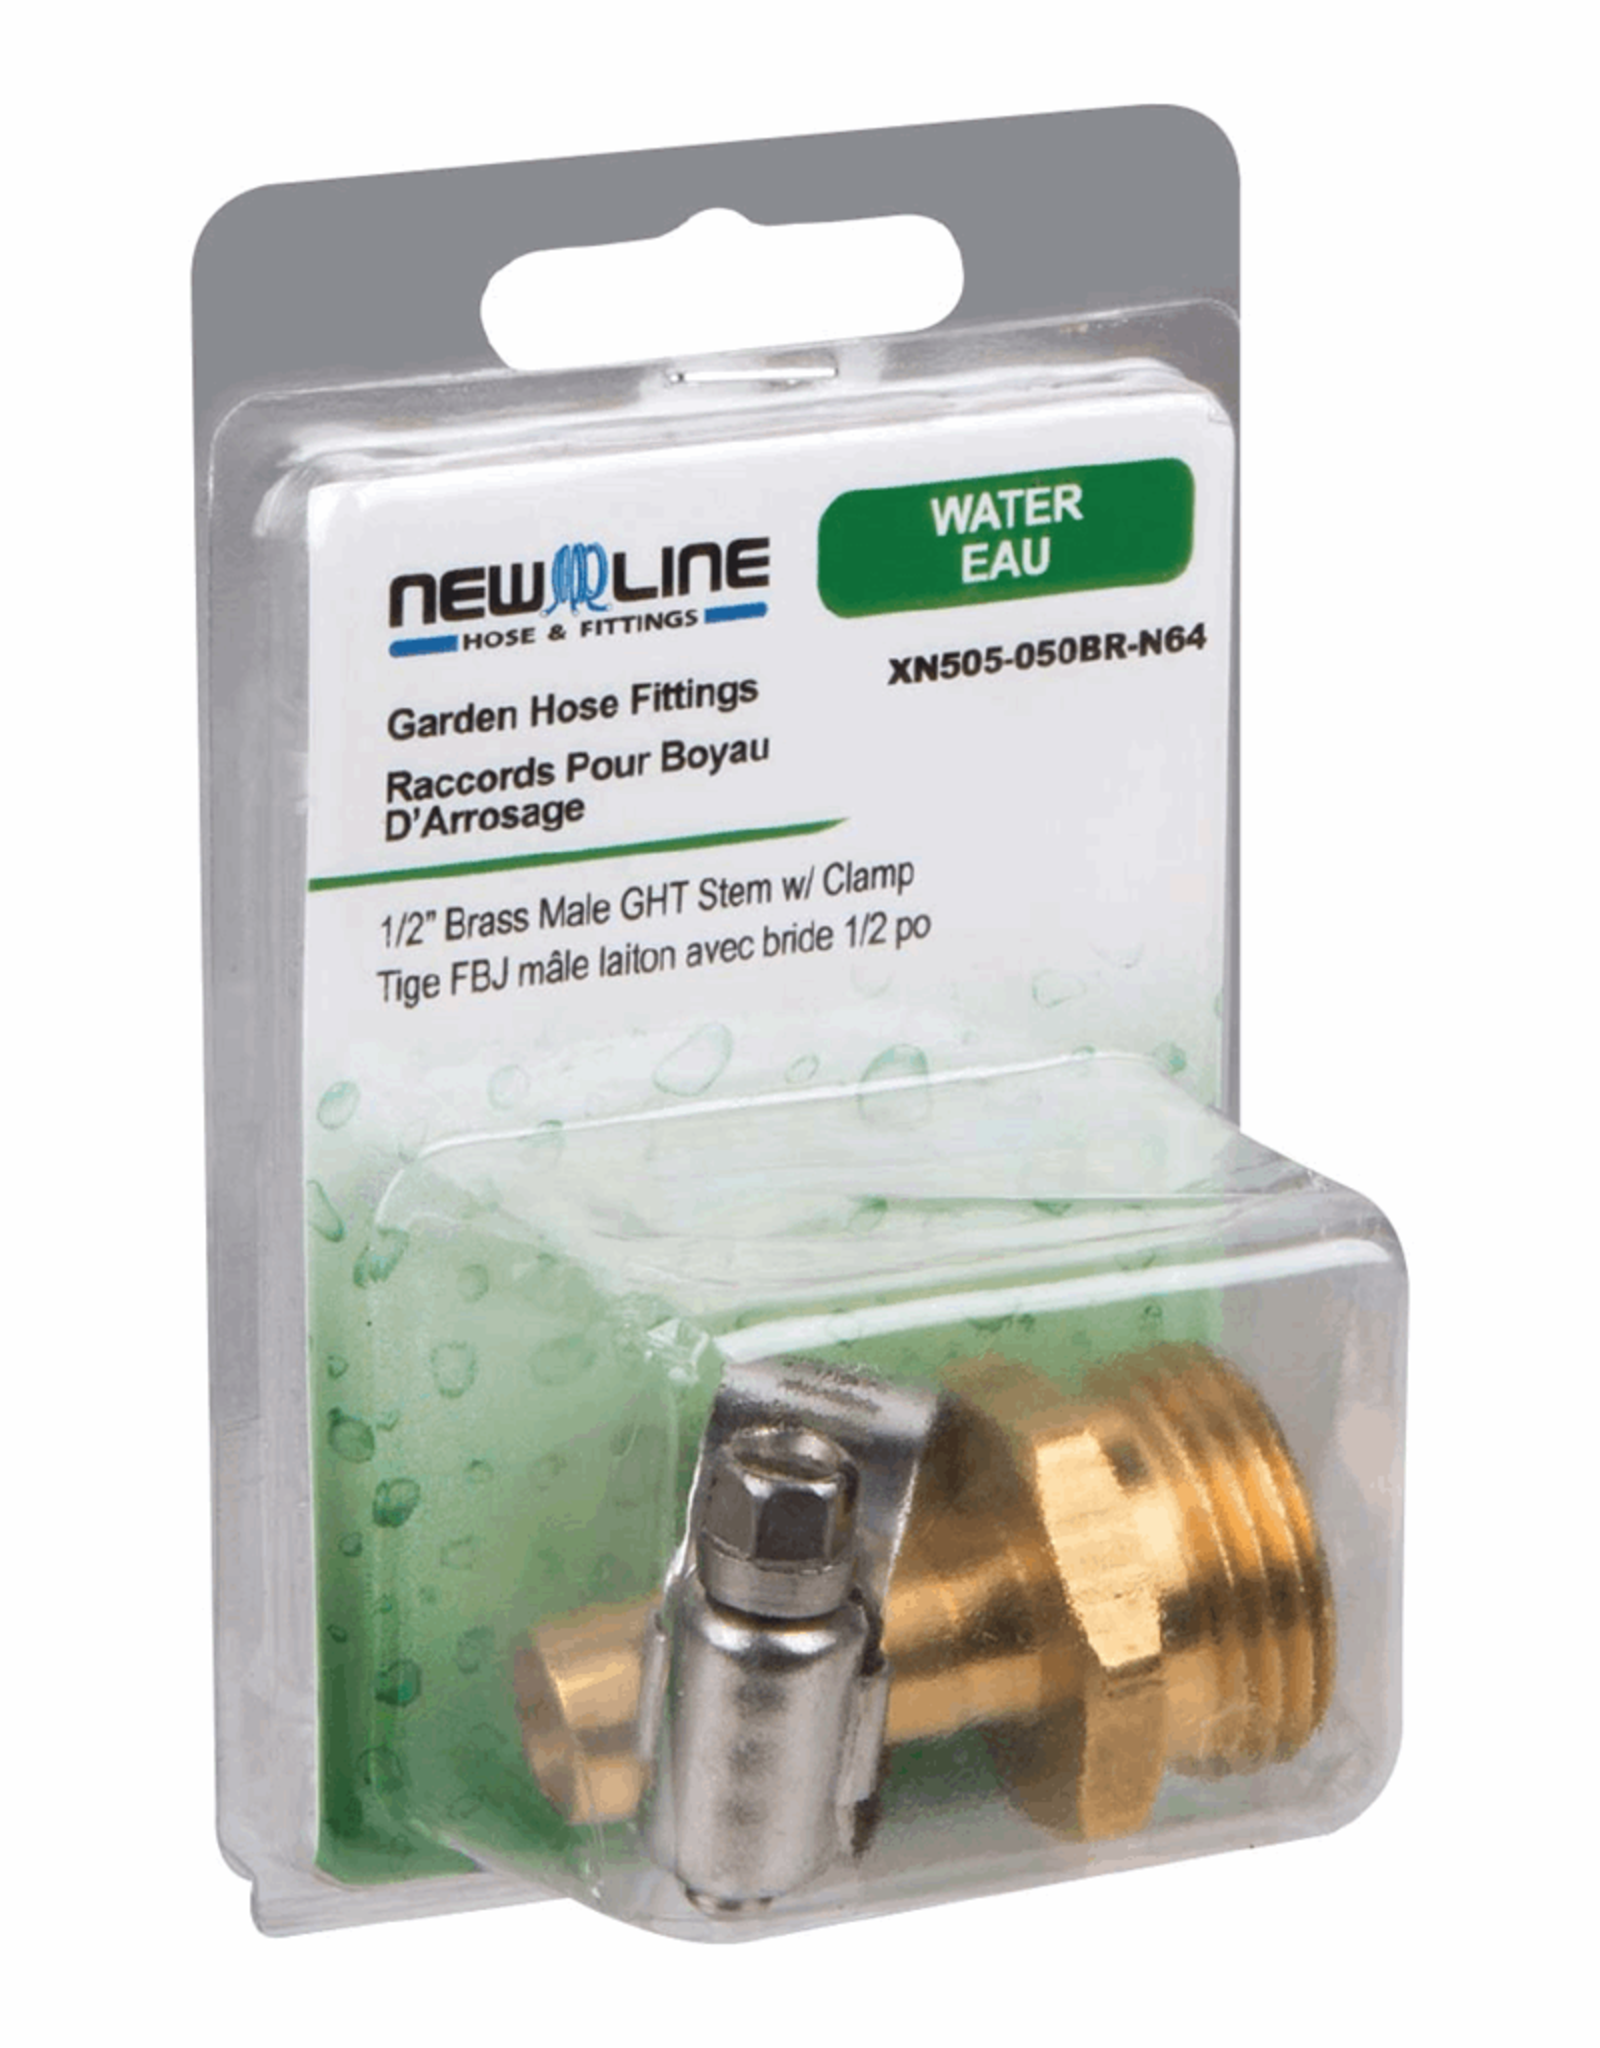 3/4 Brass Male GHT Stem with Clamp